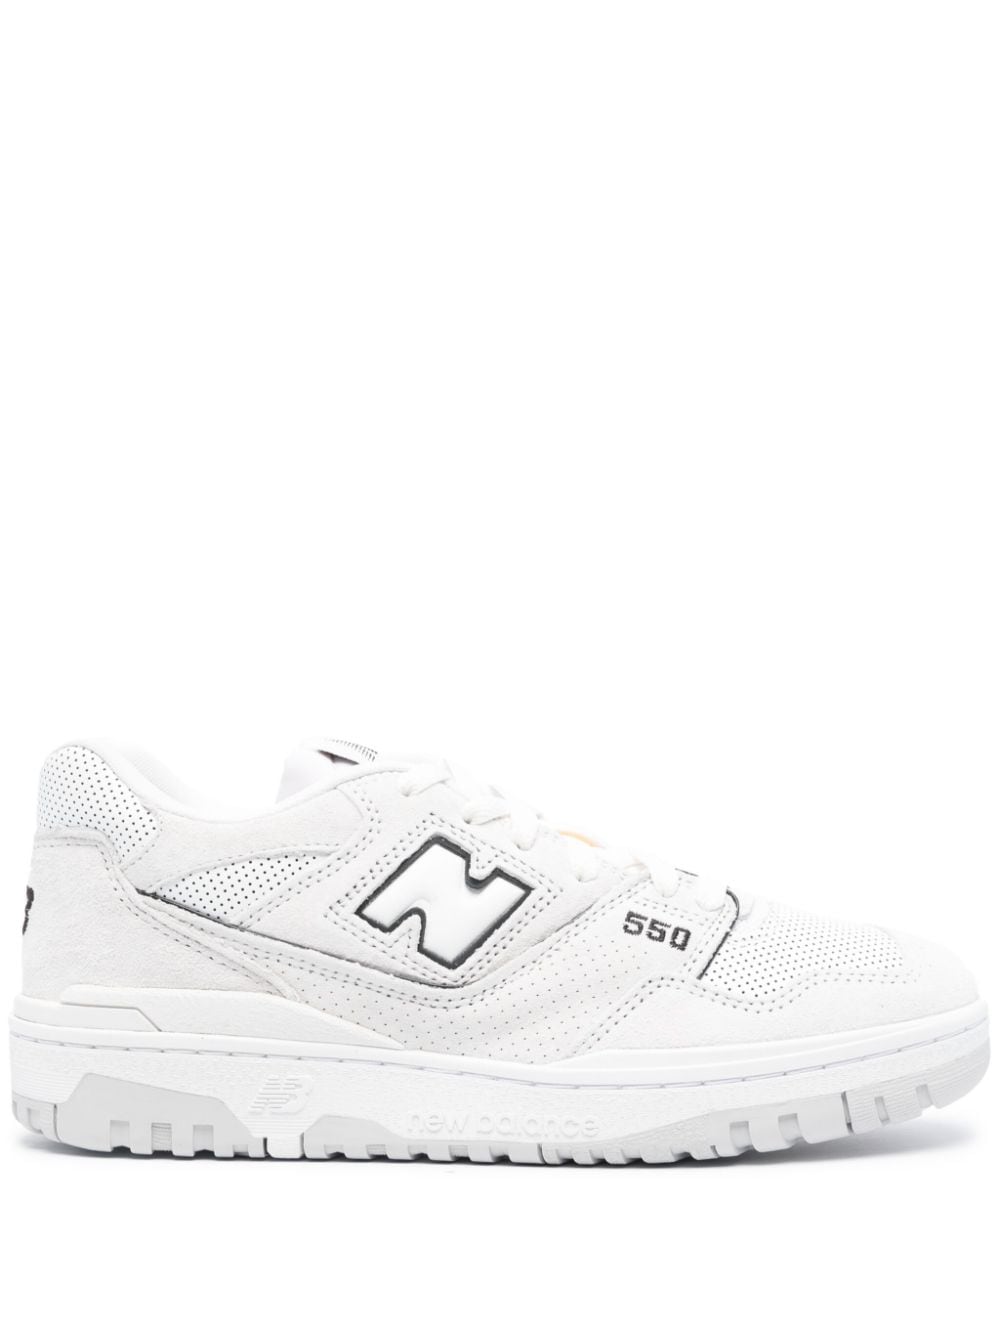 New Balance 550 "Reflection/White/Black" sneakers - Neutrals